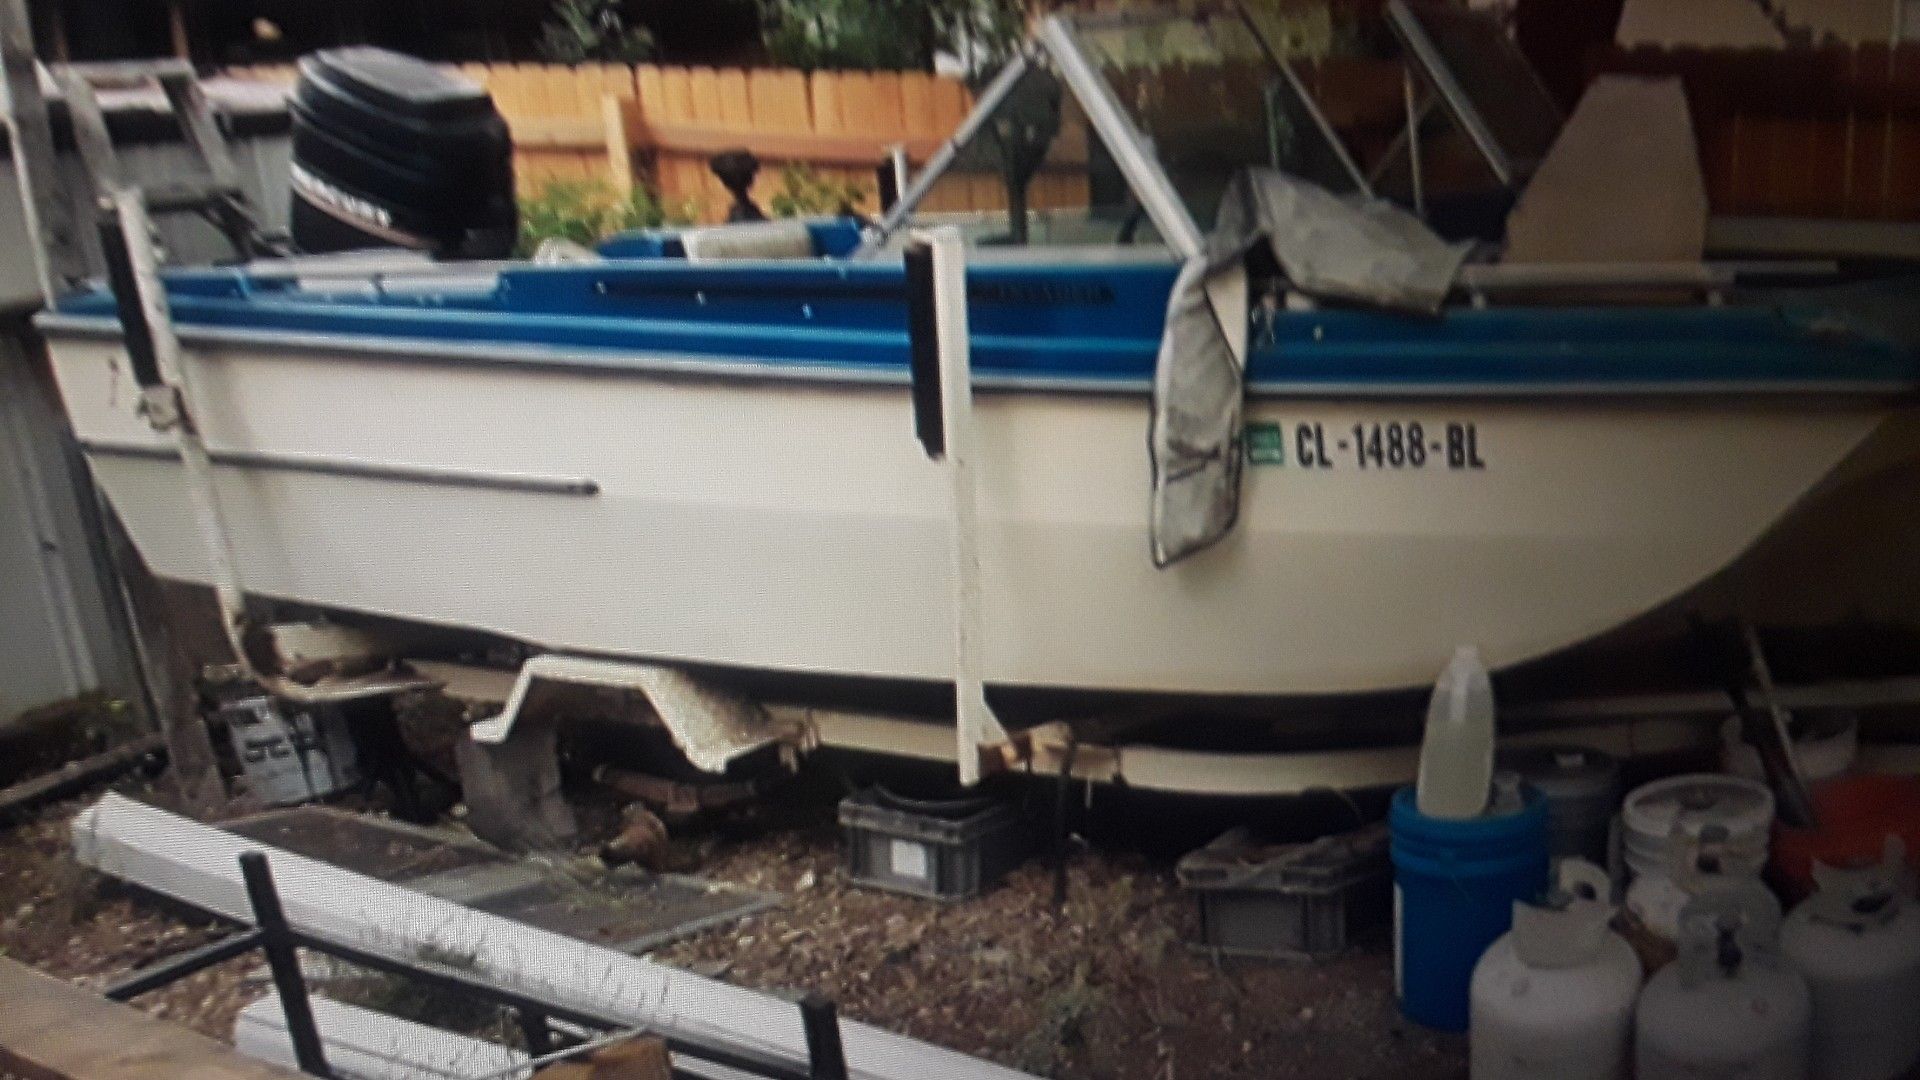 Boats for sale in excellent condition Motorworks and was just recently tested